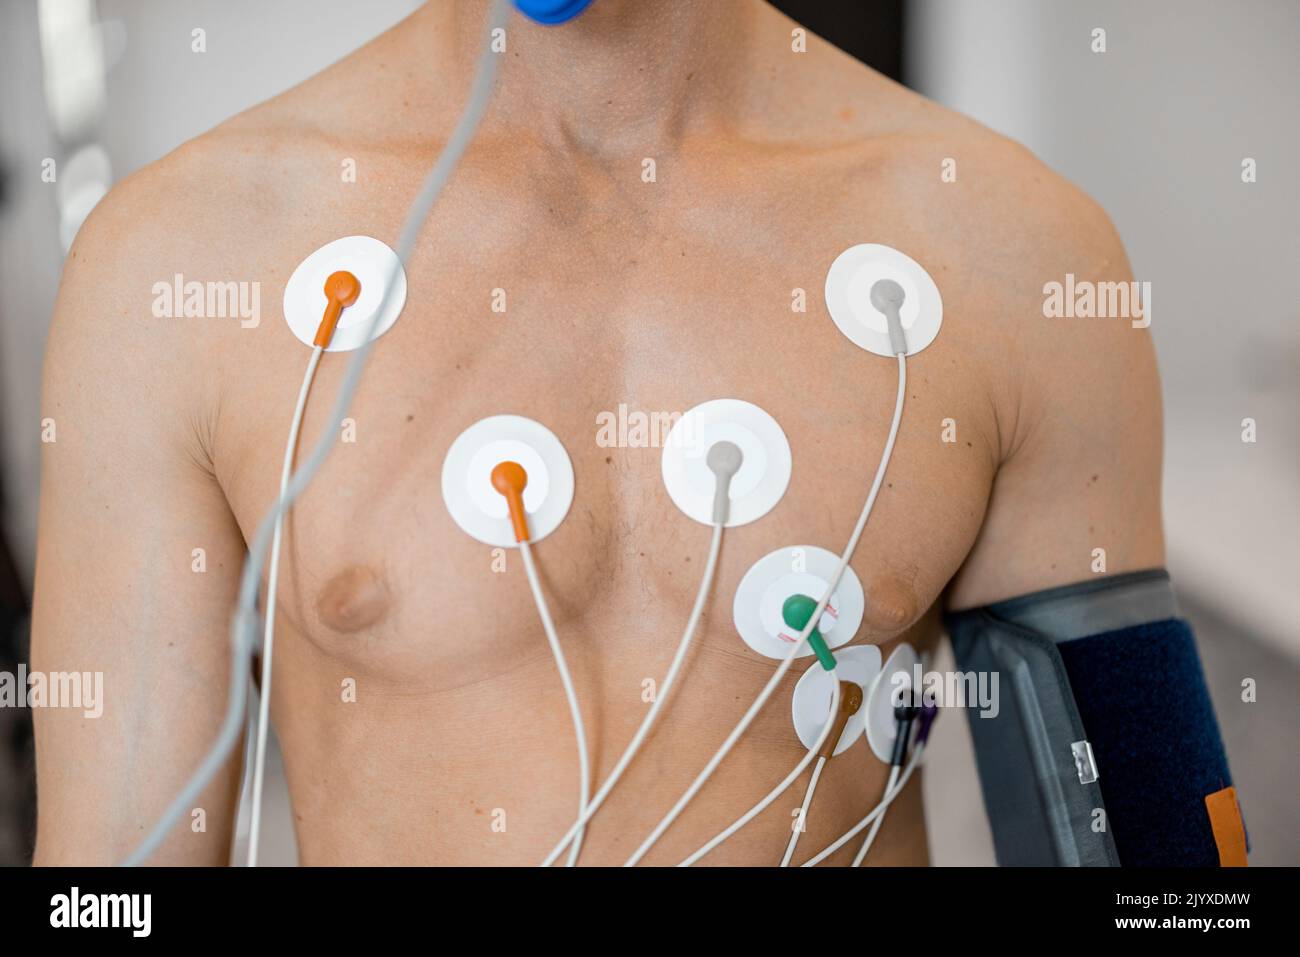 Torso of man athlete with electrodes, testing heart system on bike simulator Stock Photo